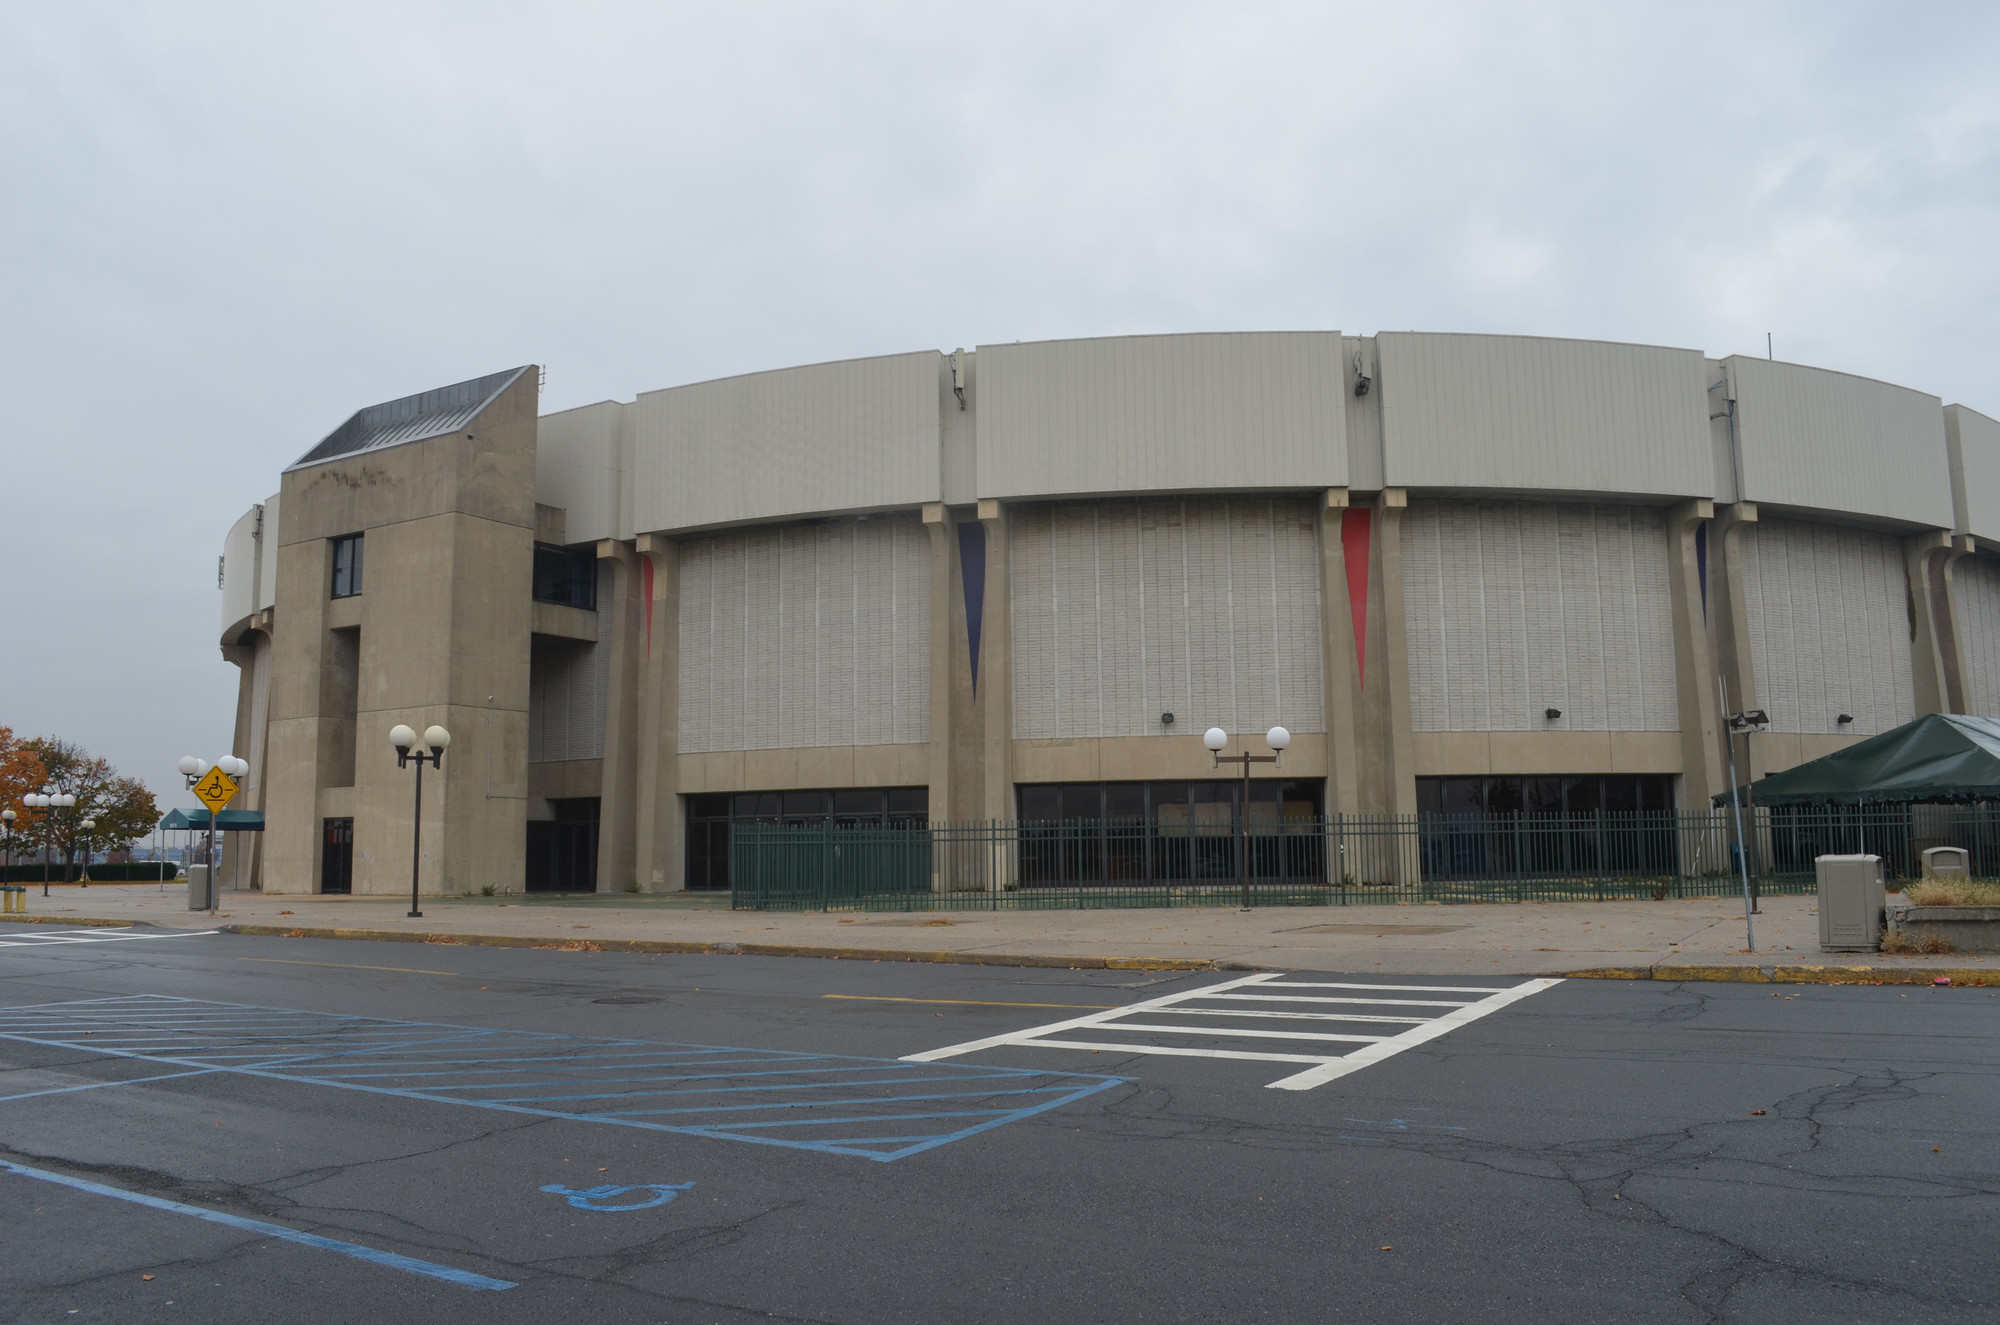 The Coliseum is scheduled to reopen late next year. The arena is located in Uniondale, a community that neighbors East Meadow.